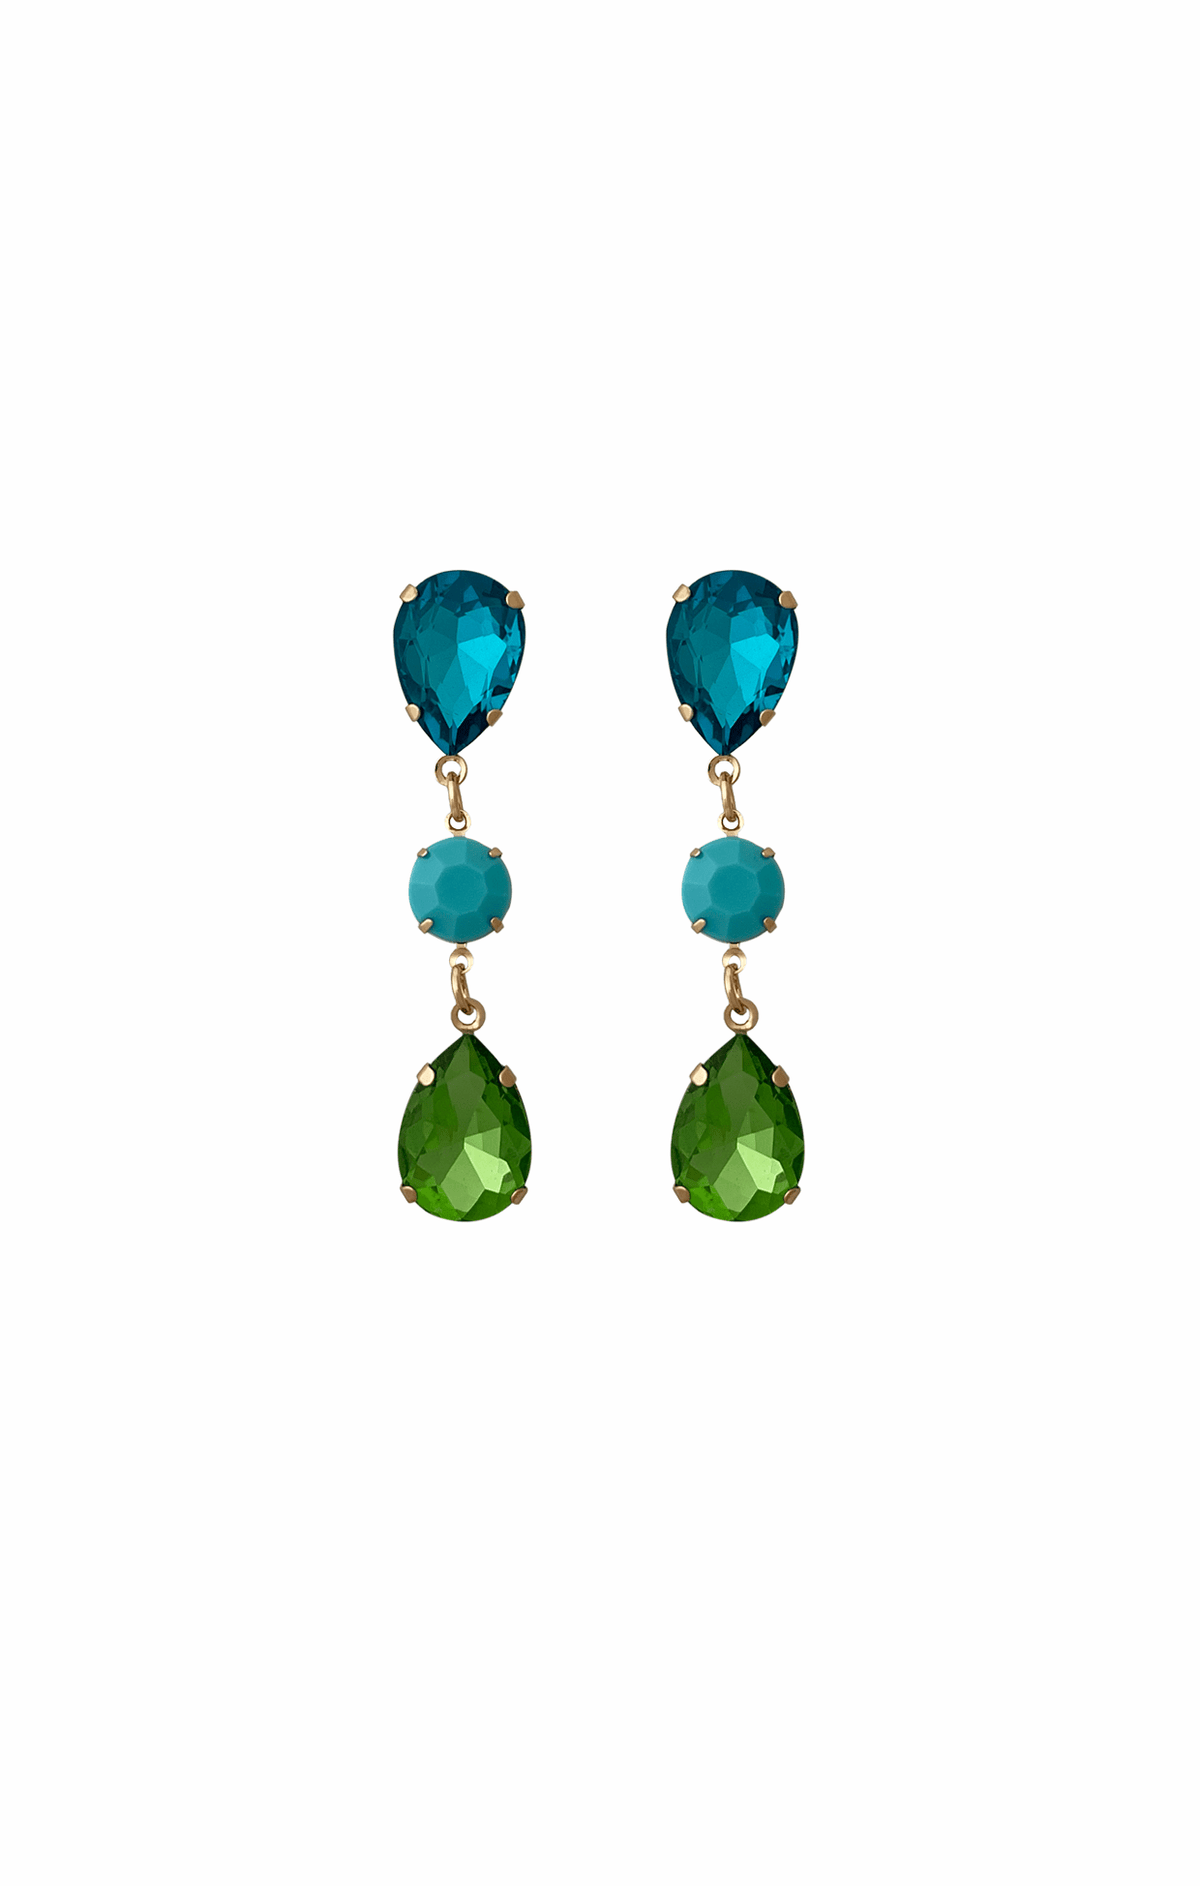 Multi Occasion OS / BLUE STONE AND GLASS EVENT EARRINGS IN BLUE AND GREEN